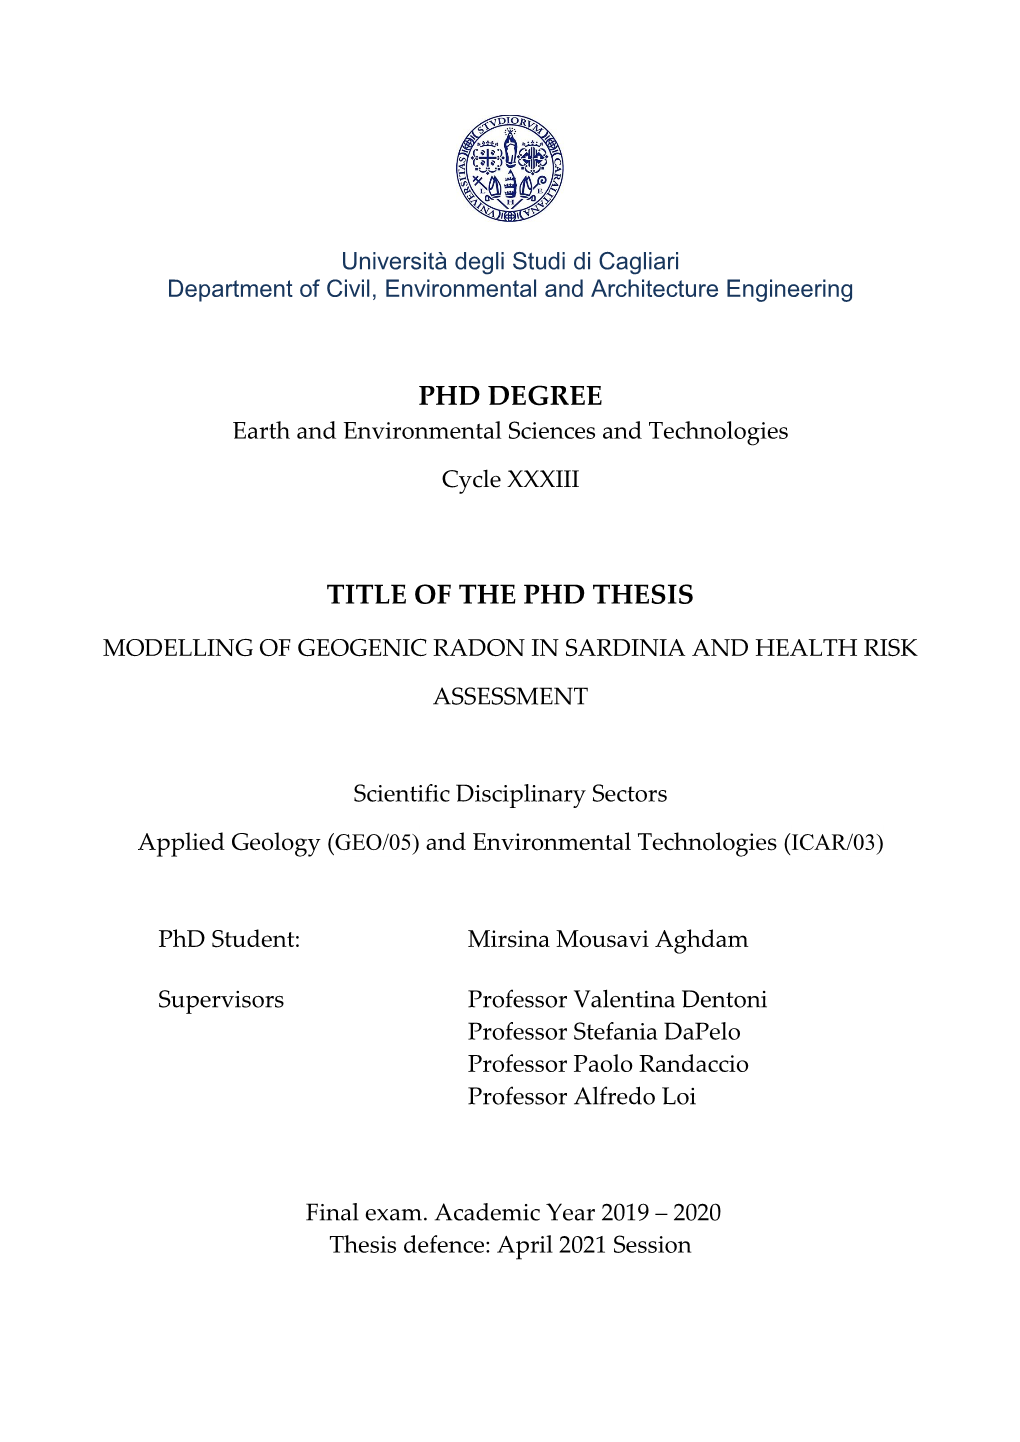 Phd Degree Title of the Phd Thesis